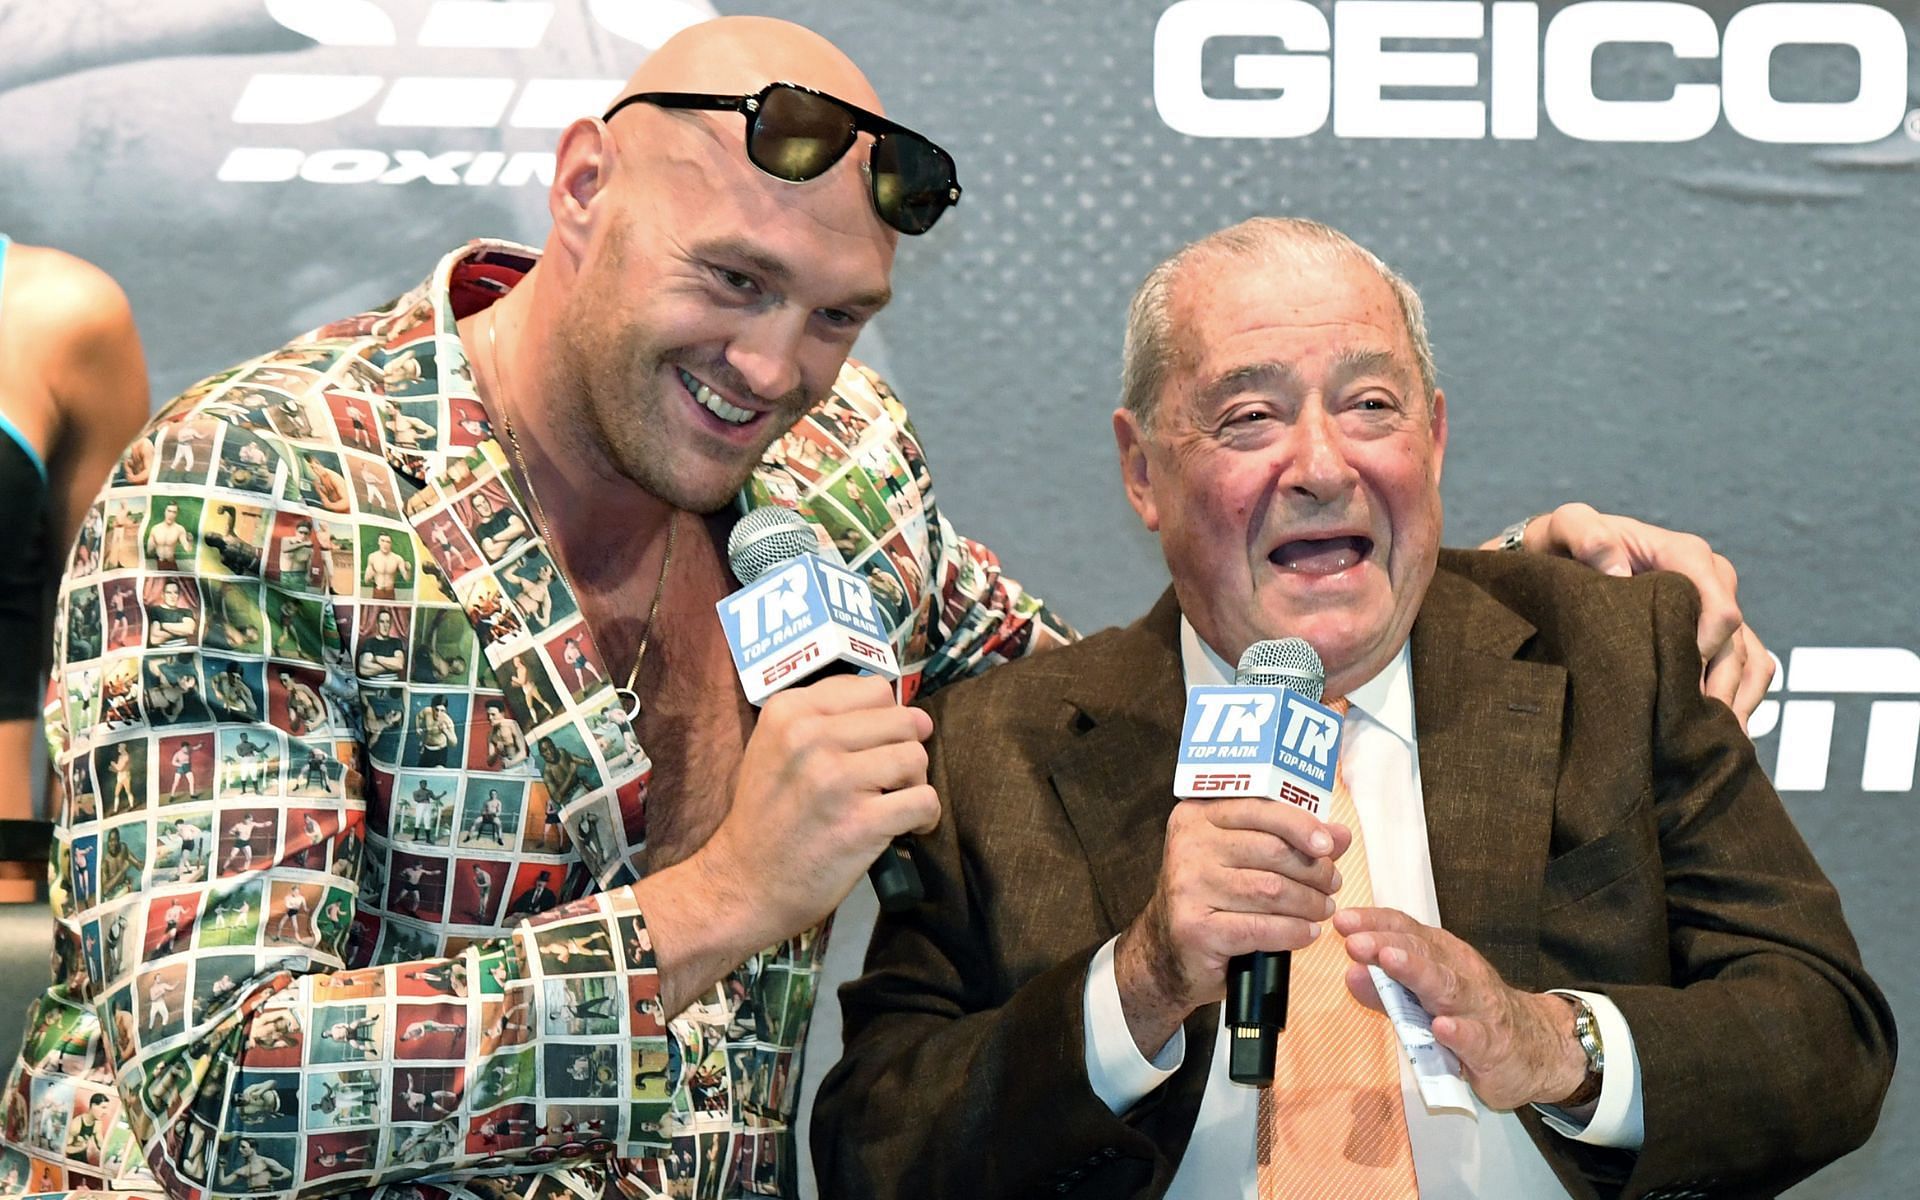 Tyson Fury (left) with Bob Arum (right) at a pre-fight press conference